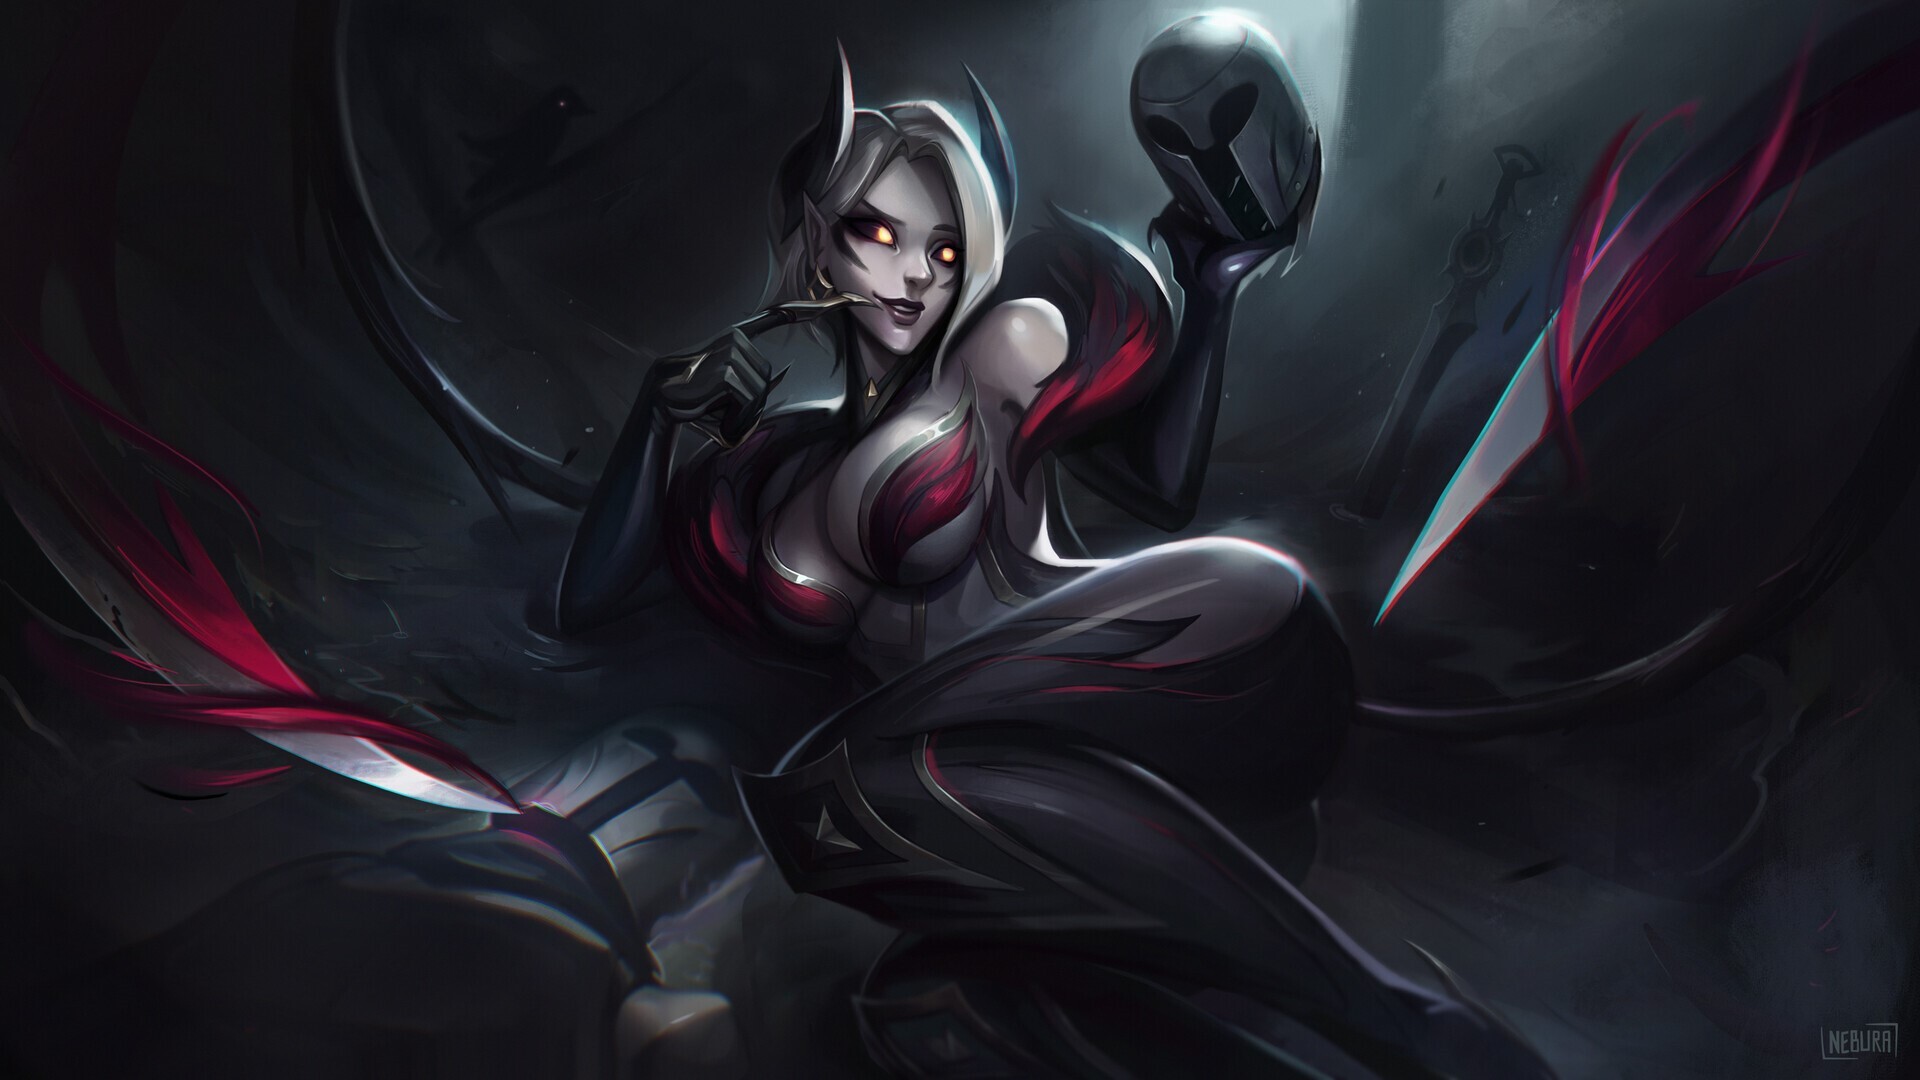 351 League Of Legends Live Wallpapers, Animated Wallpapers - MoeWalls -  Page 22